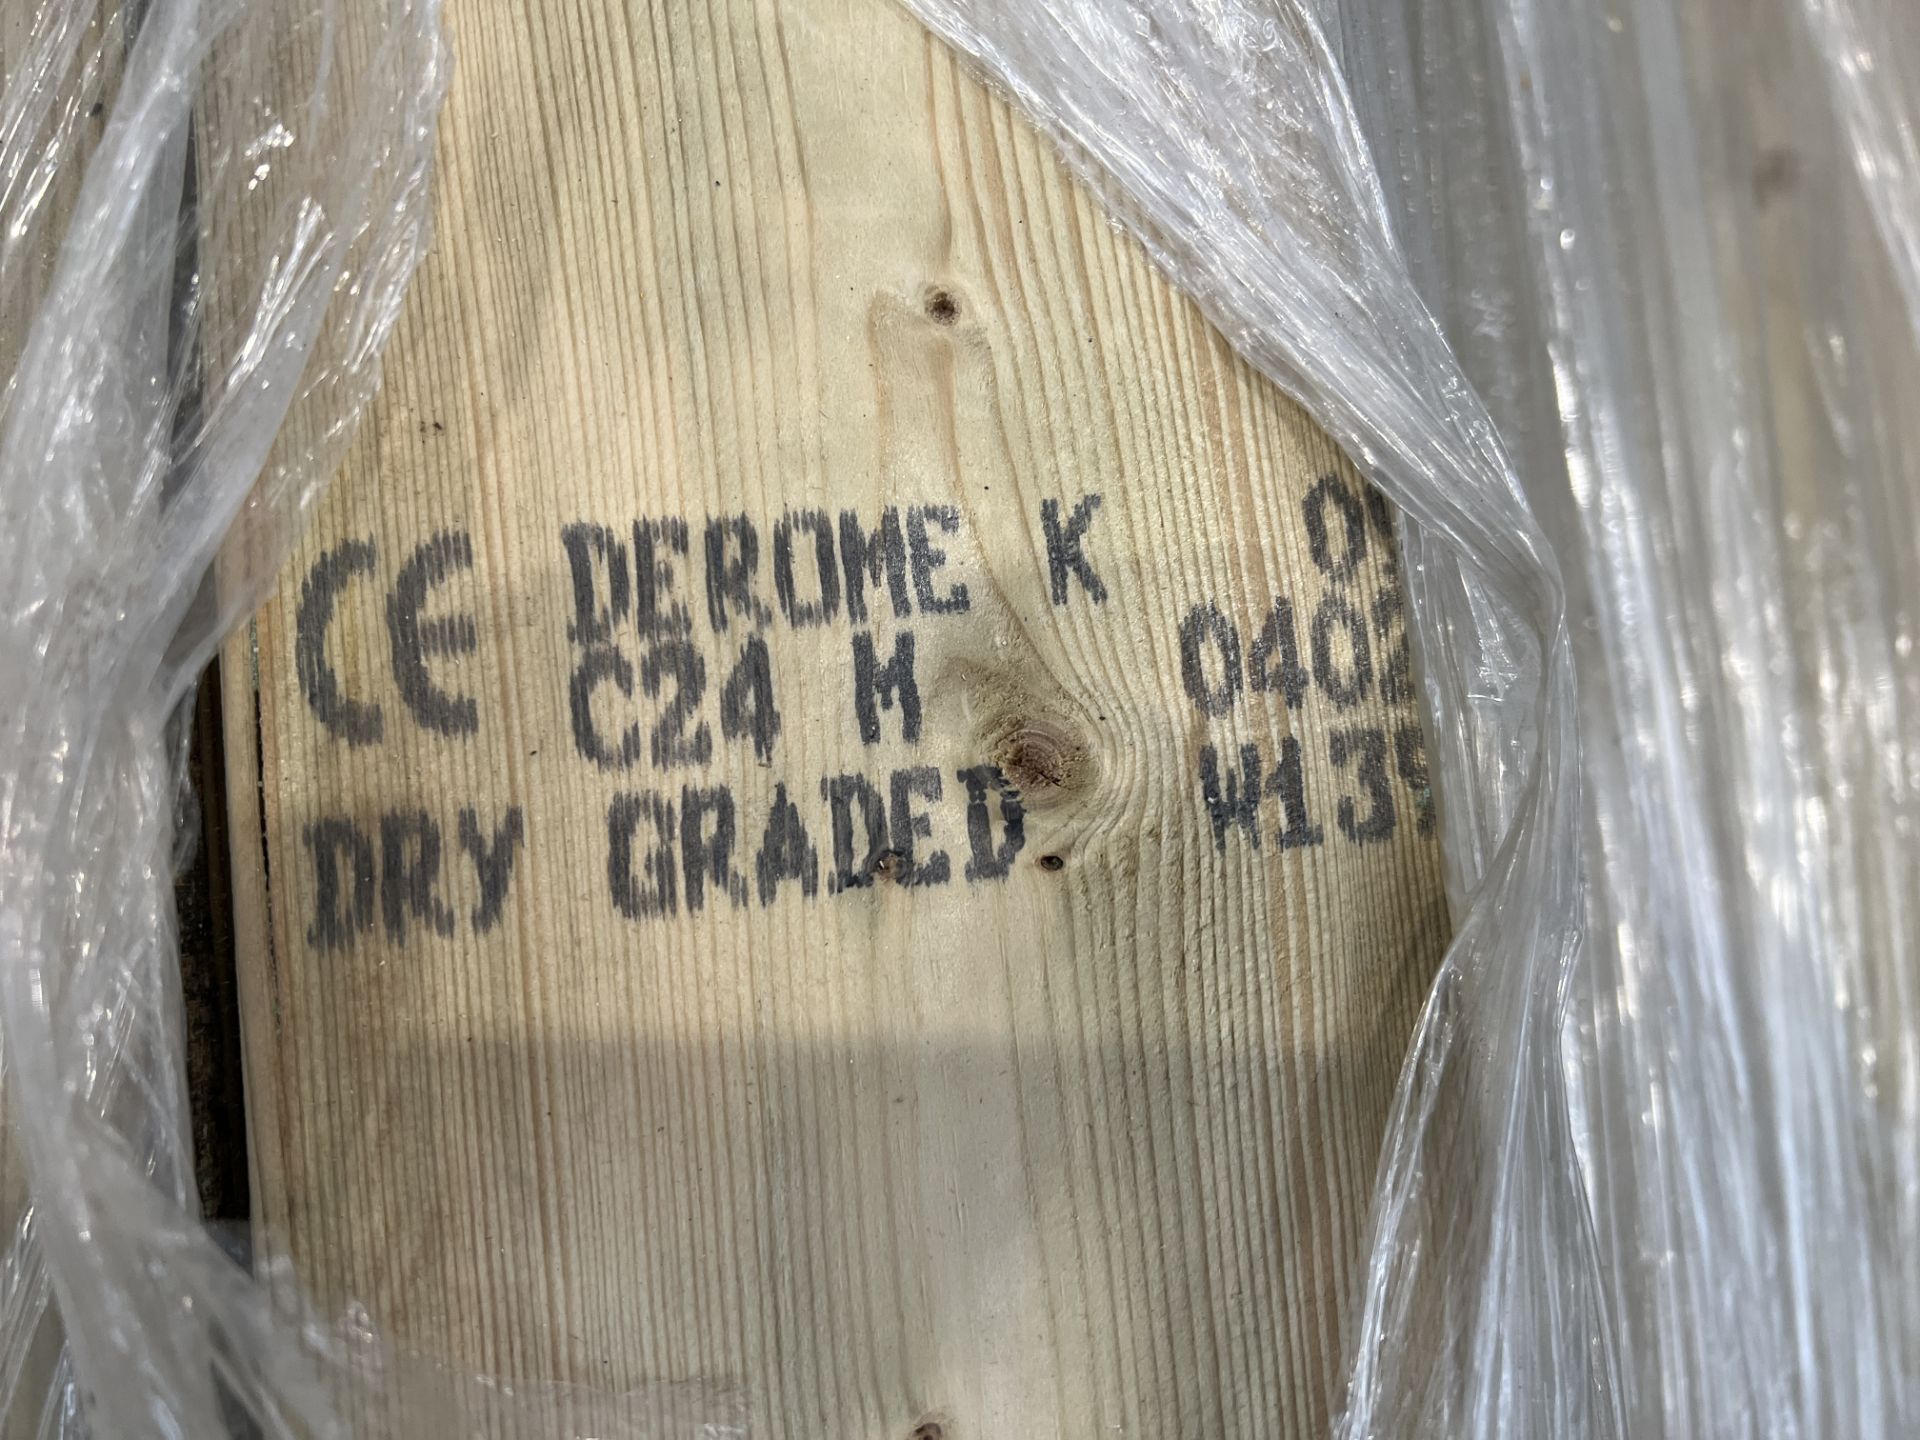 Approx. 90 lengths of Derome K C24M dry grade pressure treated timber 130mm wide x 44mm thick, - Image 3 of 4